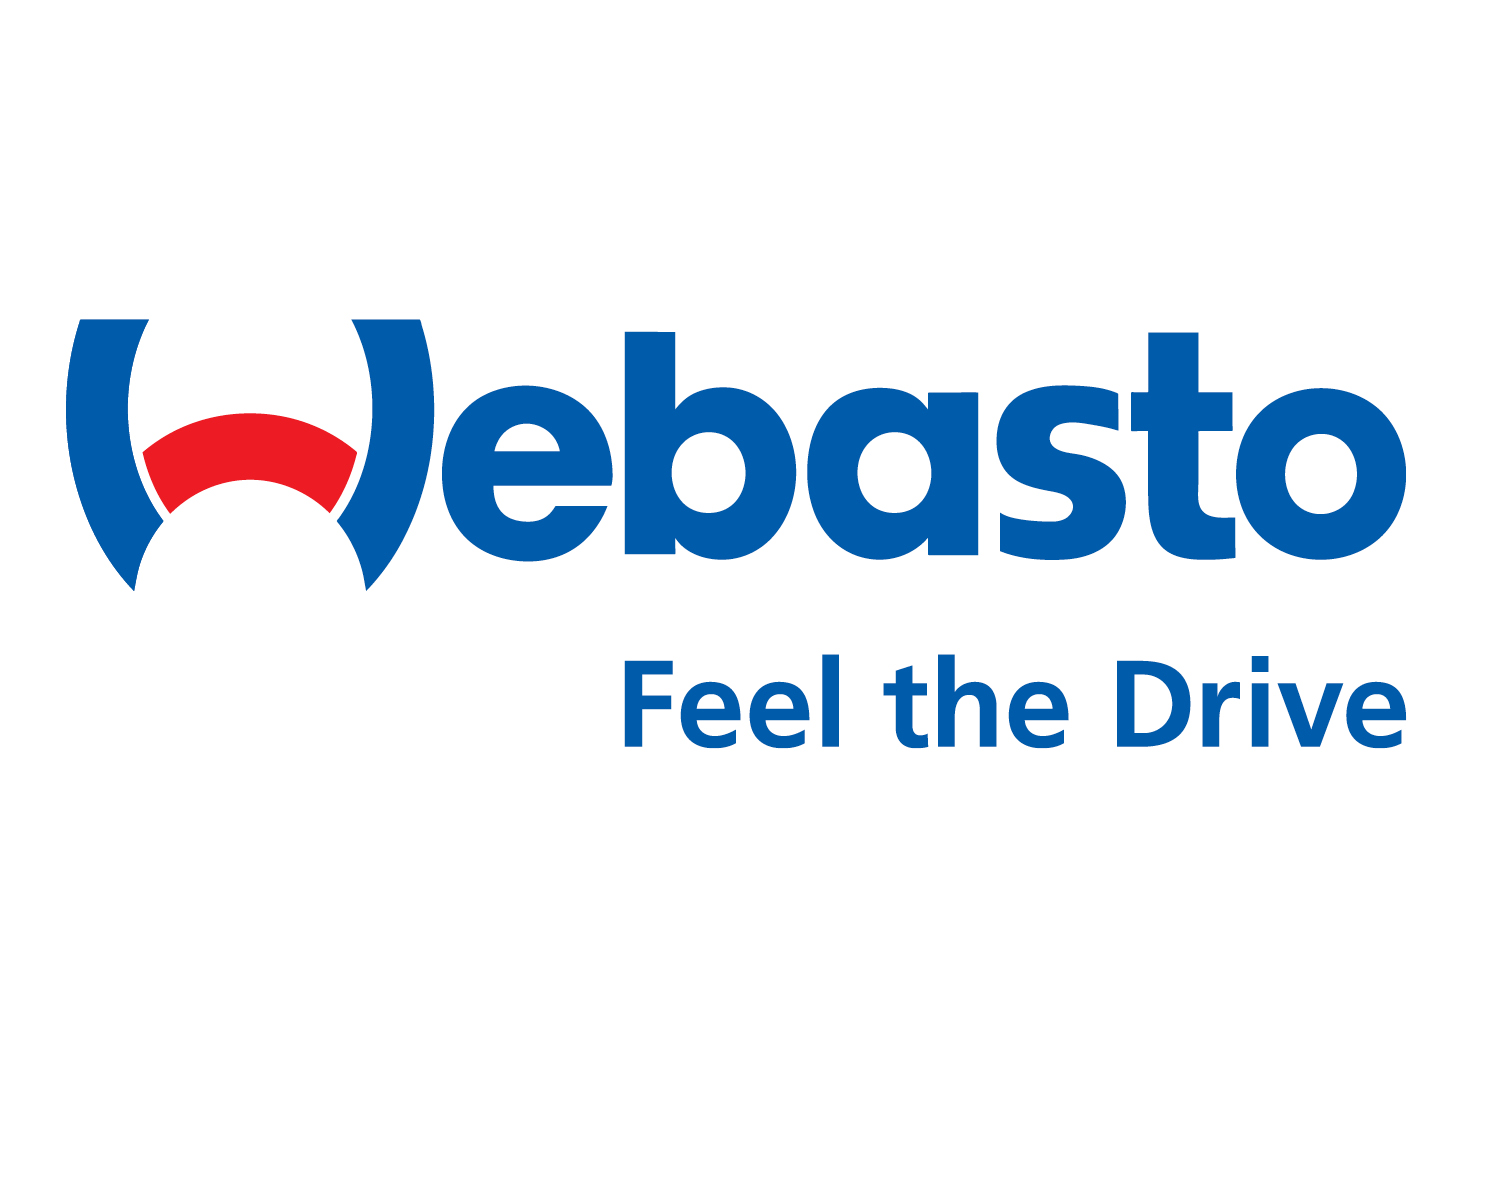 Webasto Thermo & Comfort North America is a global tier-one automotive and aftermarket equipment manufacturer with more than 80 years of open-air vehicle accessory engineering.